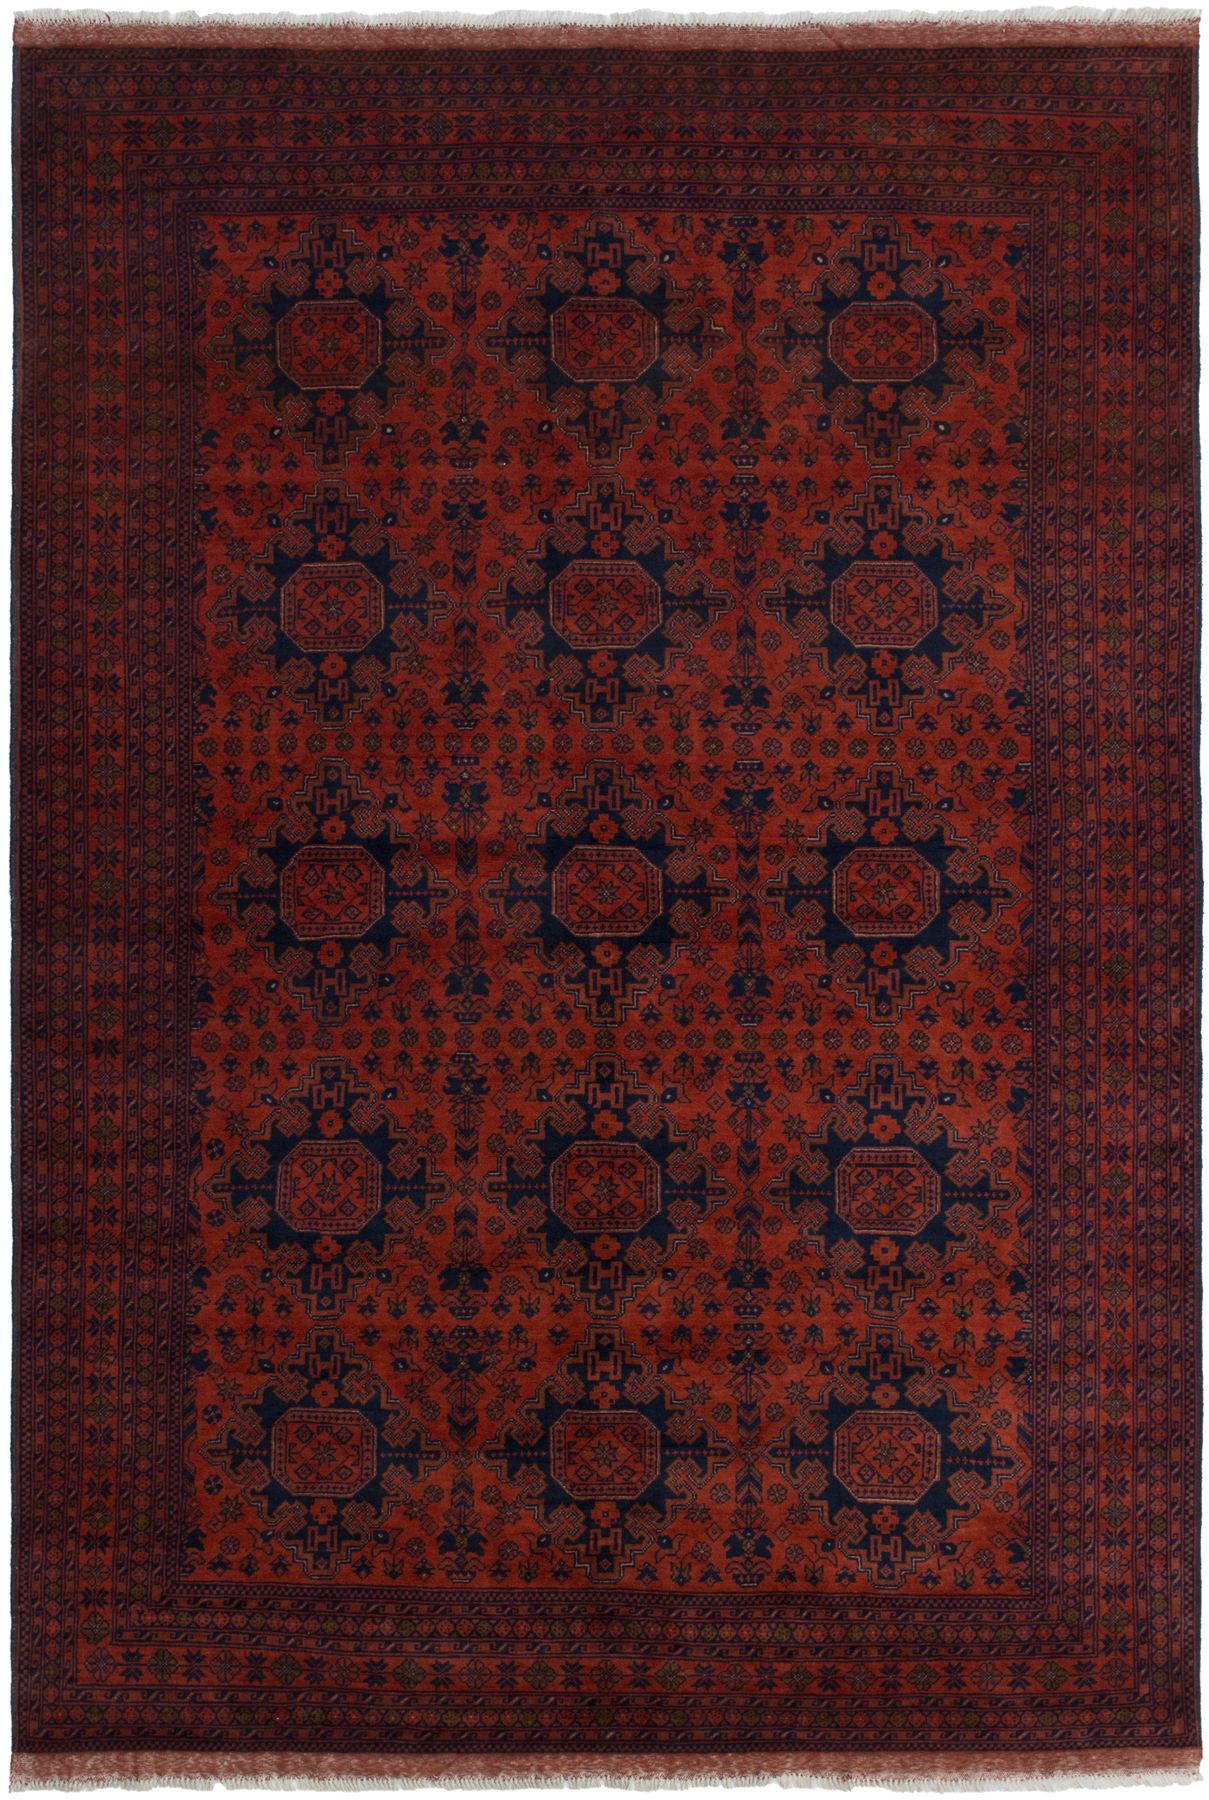 Hand-knotted Finest Khal Mohammadi Red Wool Rug 6'7" x 9'7"  Size: 6'7" x 9'7"  